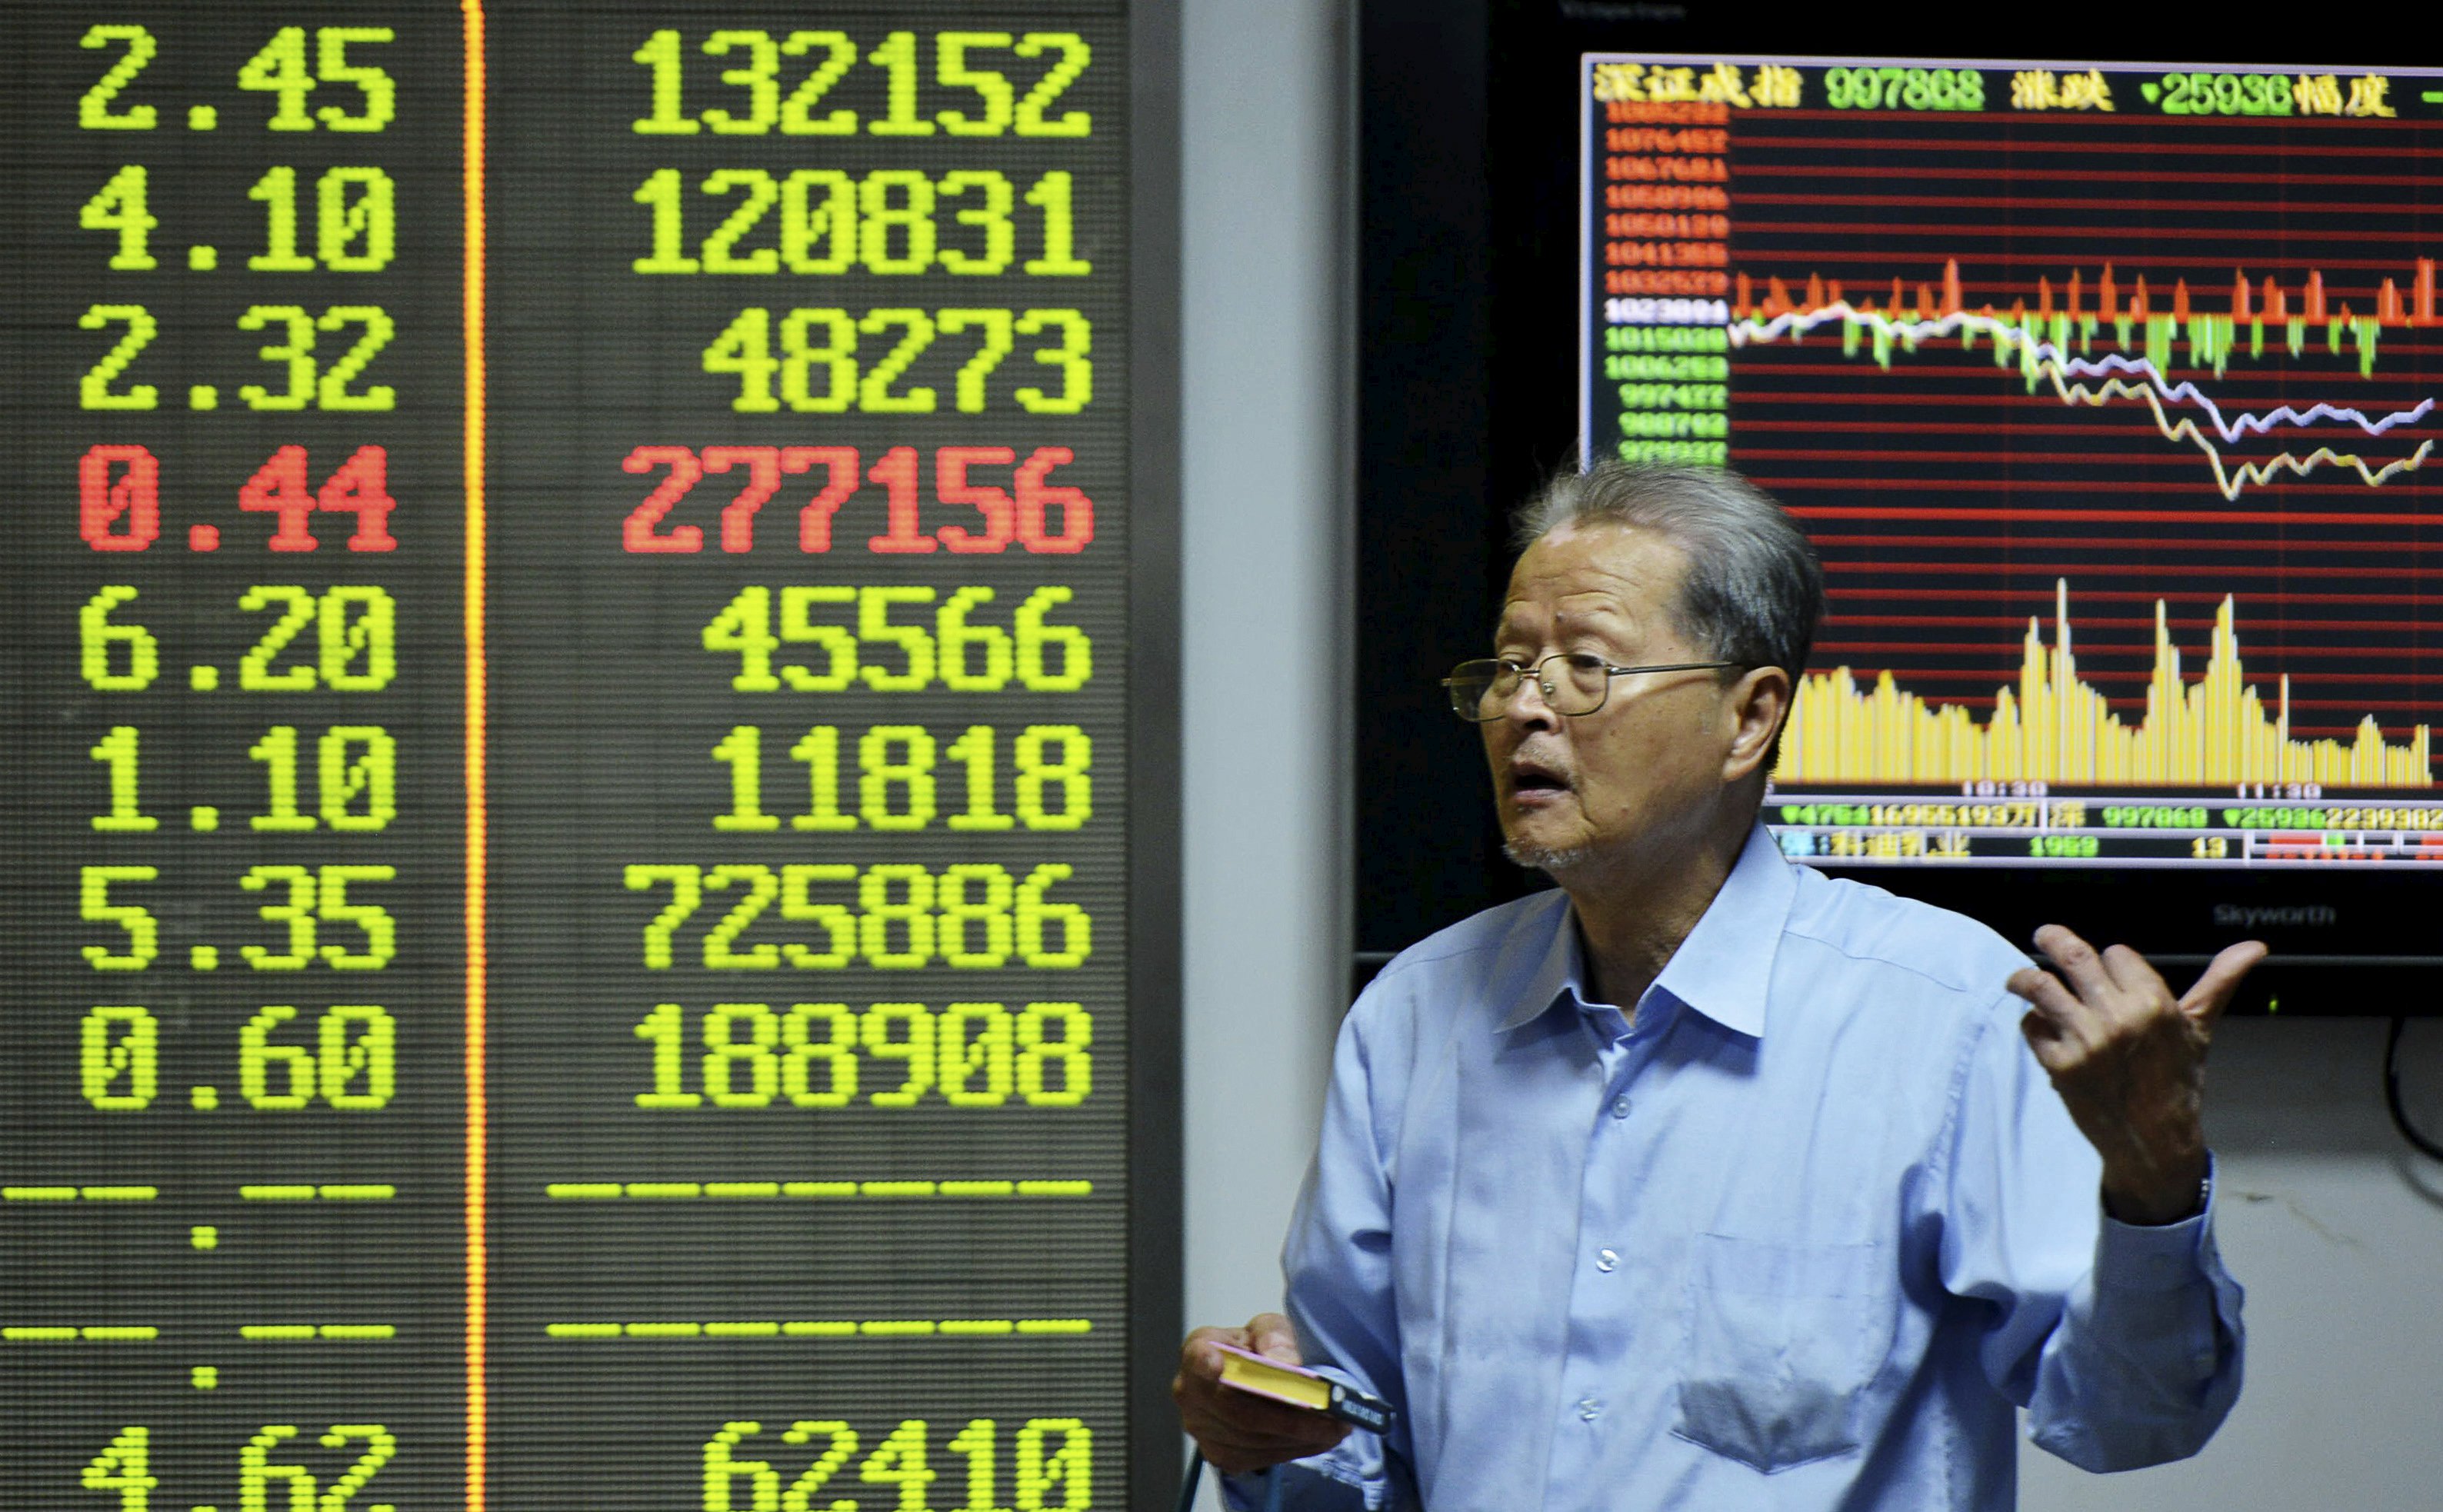 A man speaks to another investor in front of an electronic board showing stock information at a brokerage house in Hangzhou, Zhejiang province, China, September 25, 2015. China stocks fell on Friday, led by a selloff in small caps, as the main indexes ended the week roughly flat in shrinking trading volume. REUTERS/China Daily CHINA OUT. NO COMMERCIAL OR EDITORIAL SALES IN CHINA